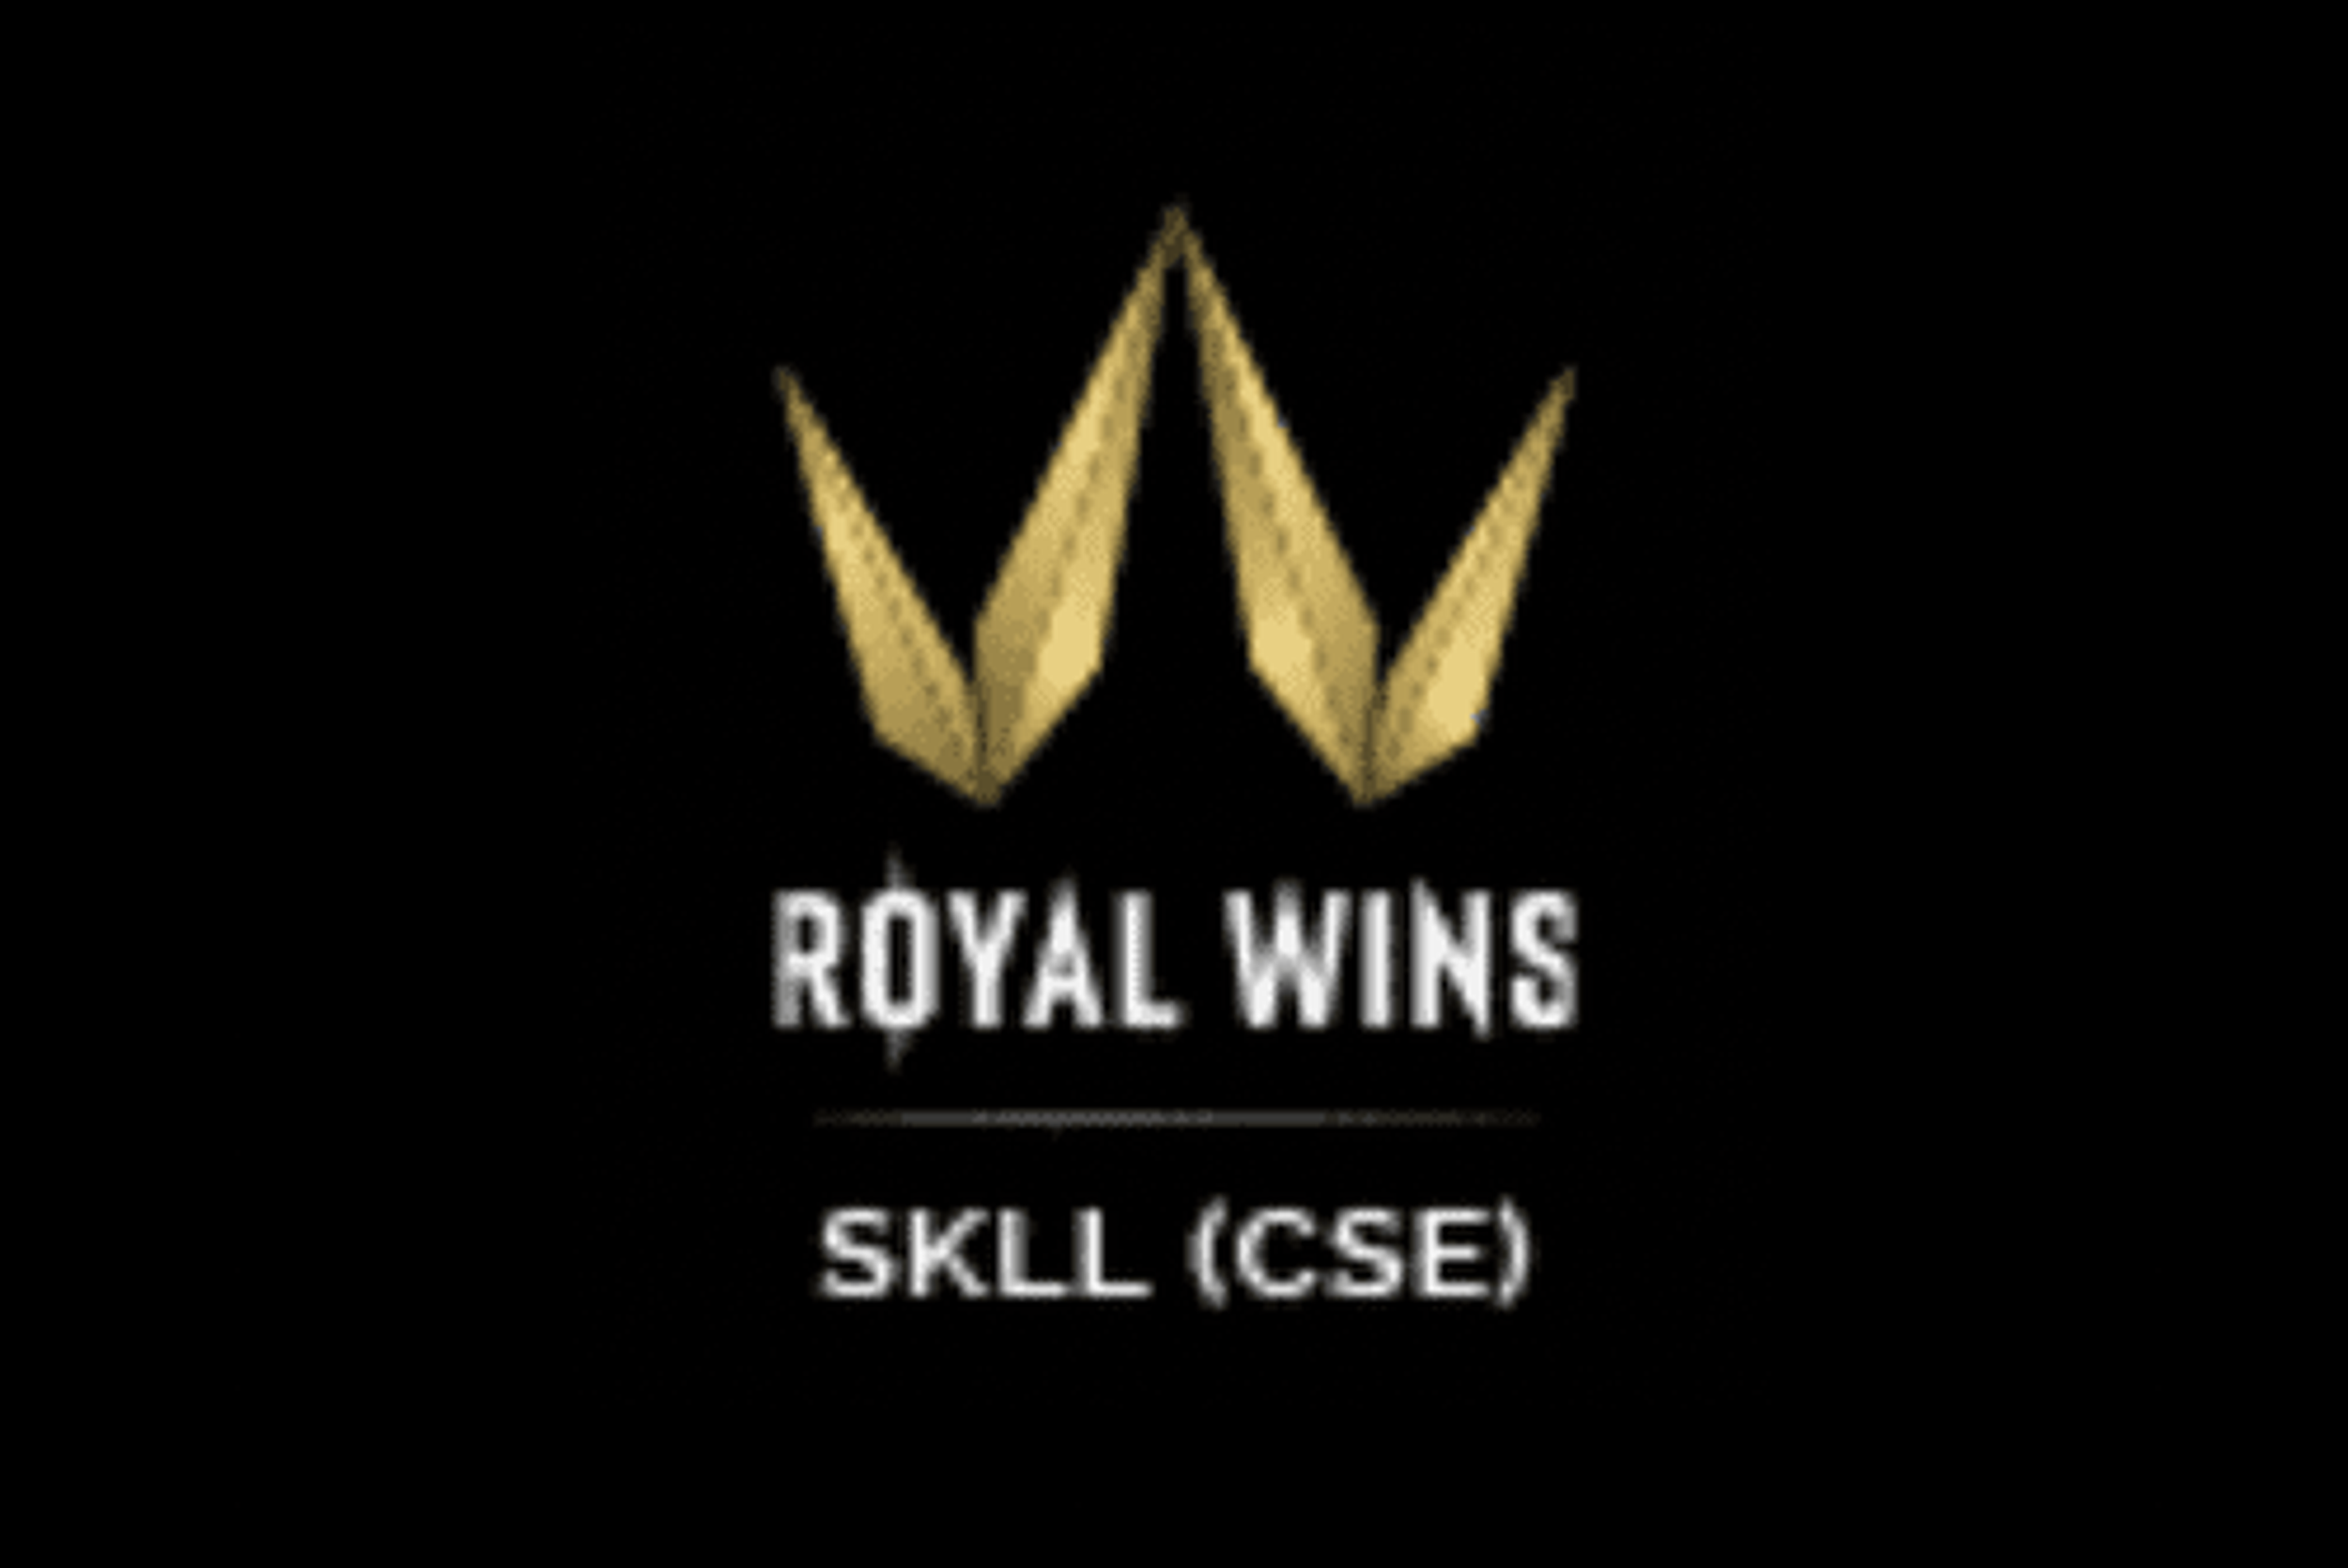 Royal Wins Reports Strong Growth Metrics for Most Recent Quarter